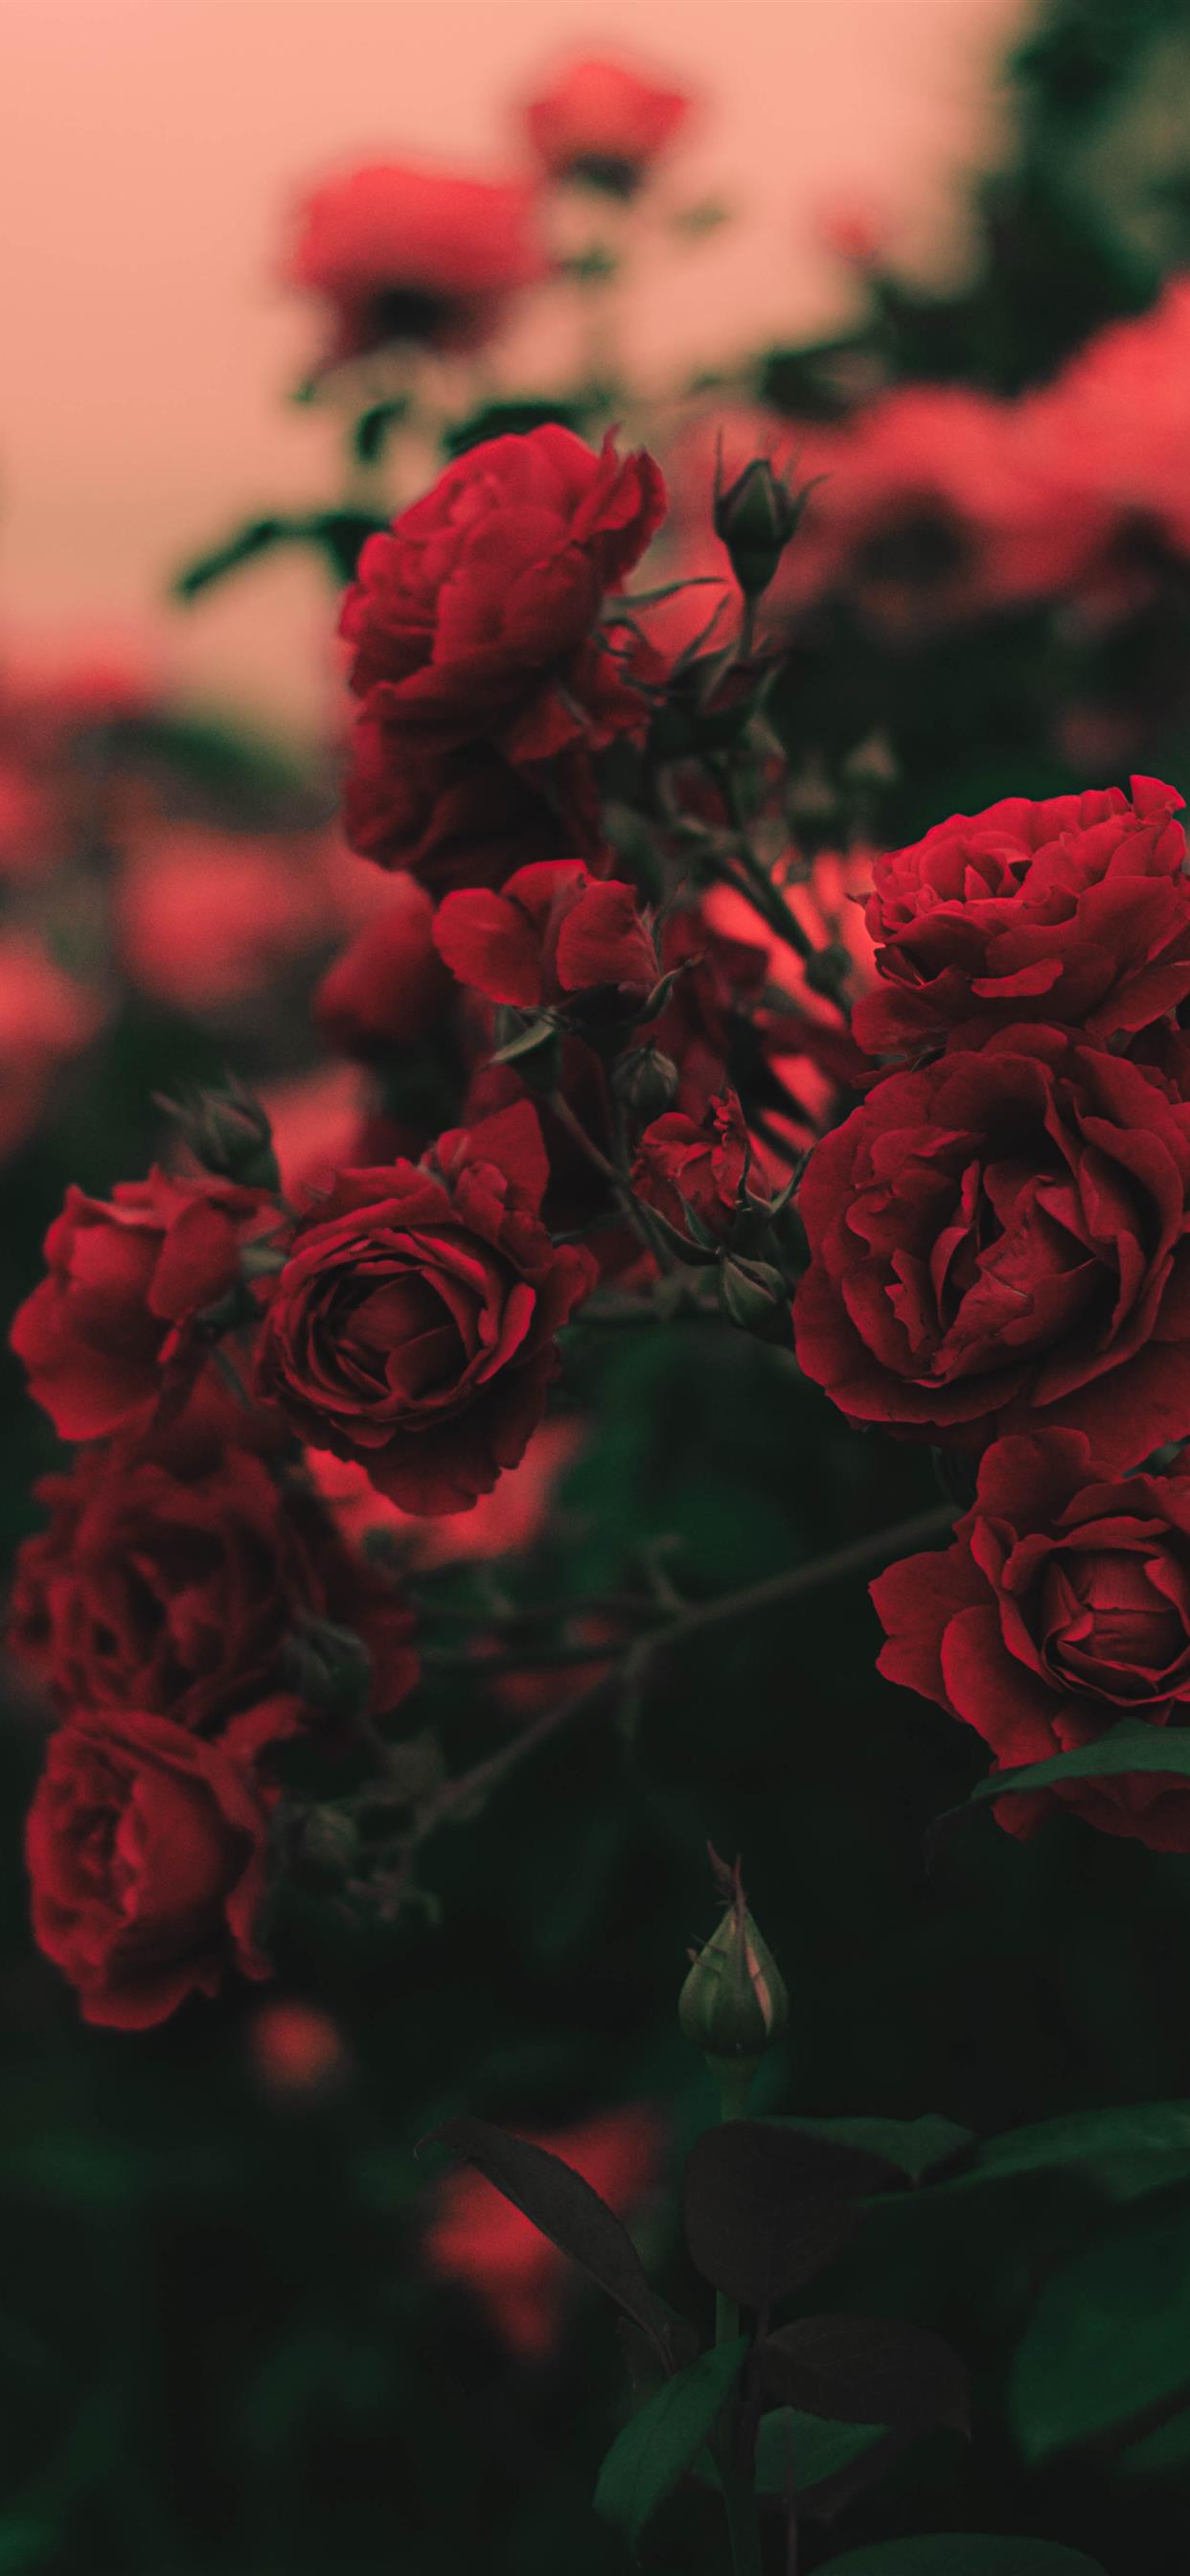 The Environmental Impact of Roses: Is Gifting Roses Sustainable? - Brightly